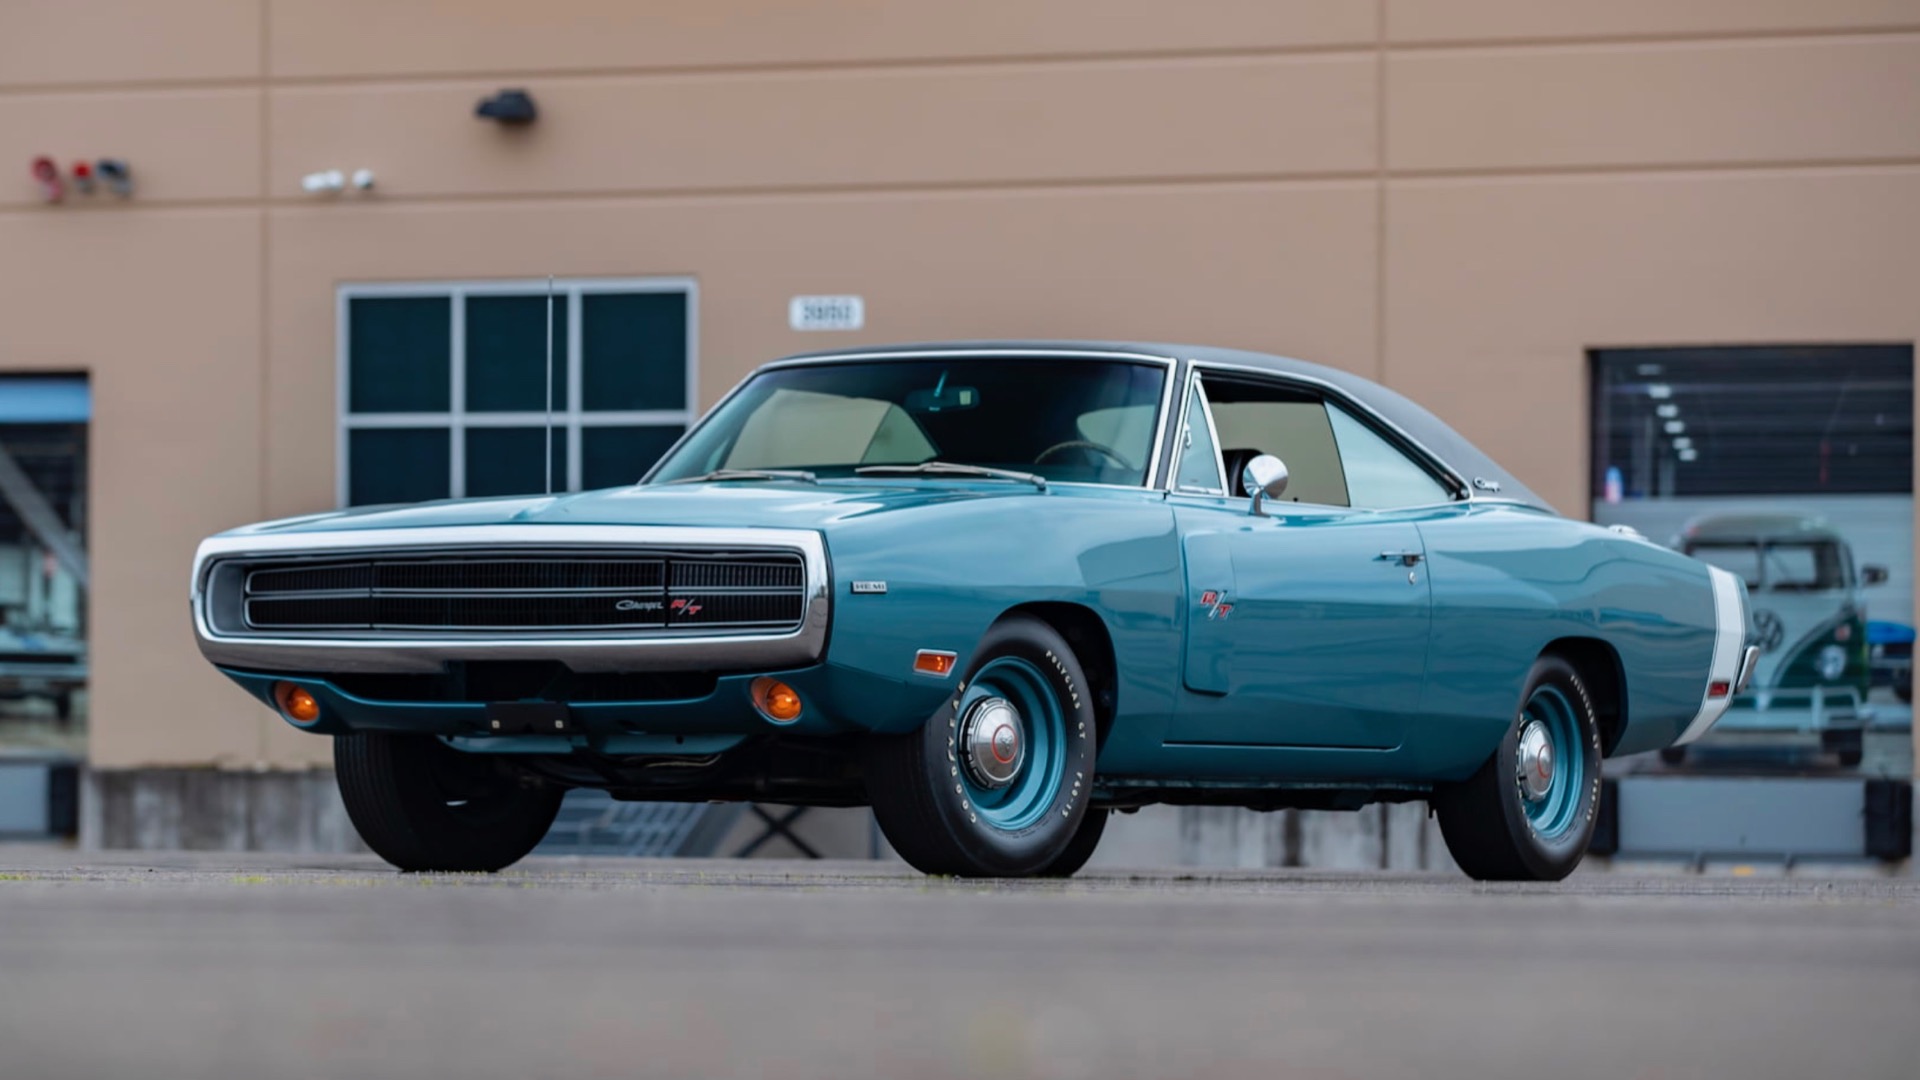 The only known example of a B3 Blue 1970 Dodge Charger R/T heads to auction